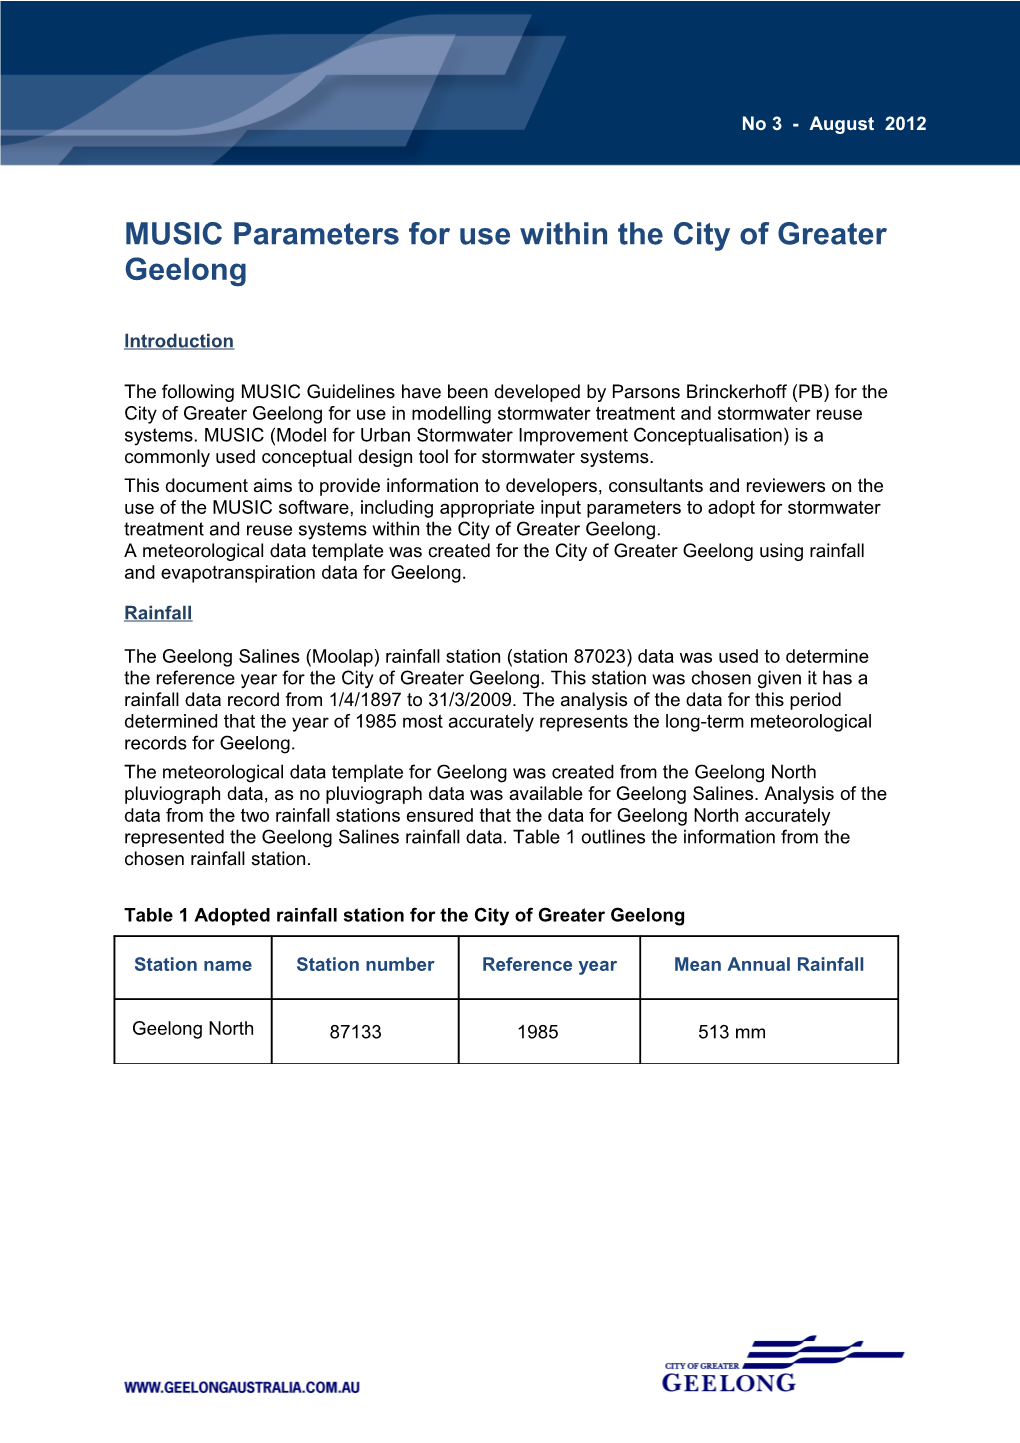 MUSIC Parameters for Use Within the City of Greater Geelong